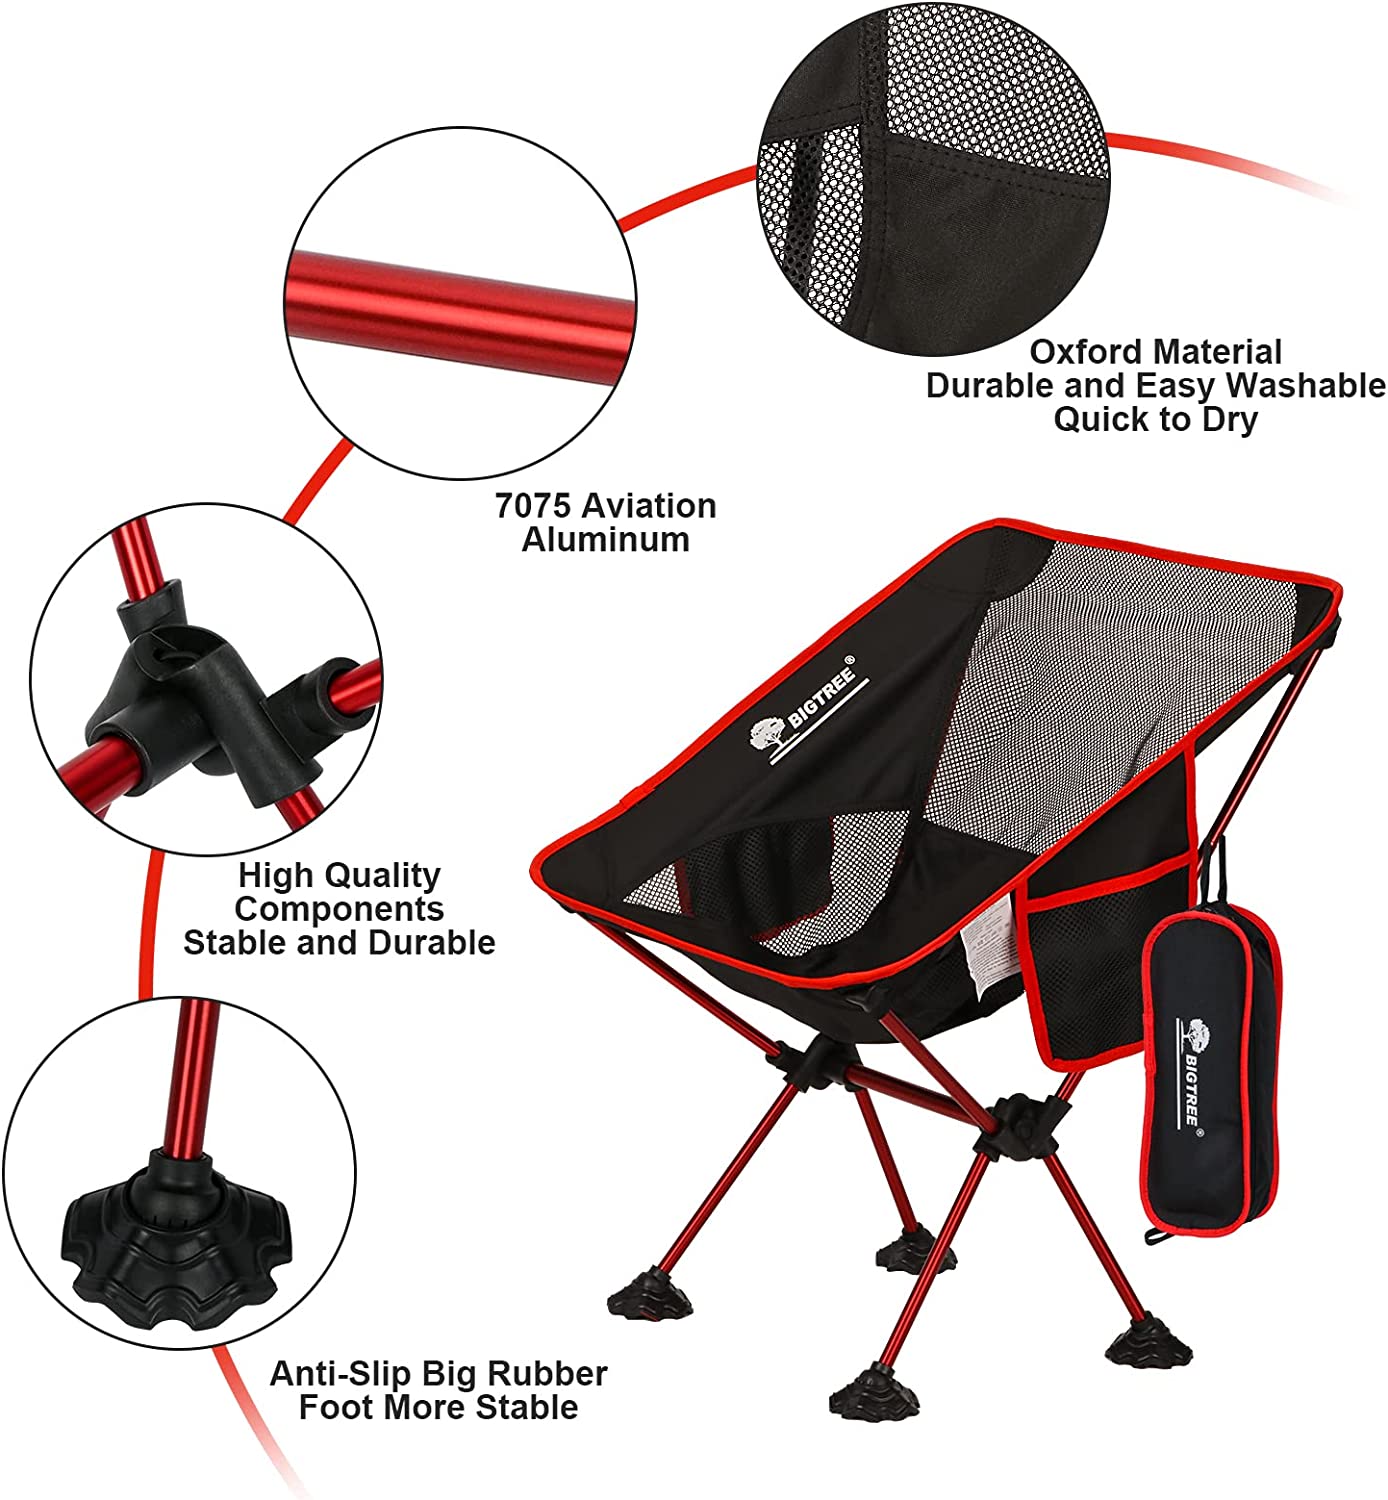 BIGTREE Folding Camping Chair Travel Seat Side Pocket Super Compact Light Fishing Picnic Red